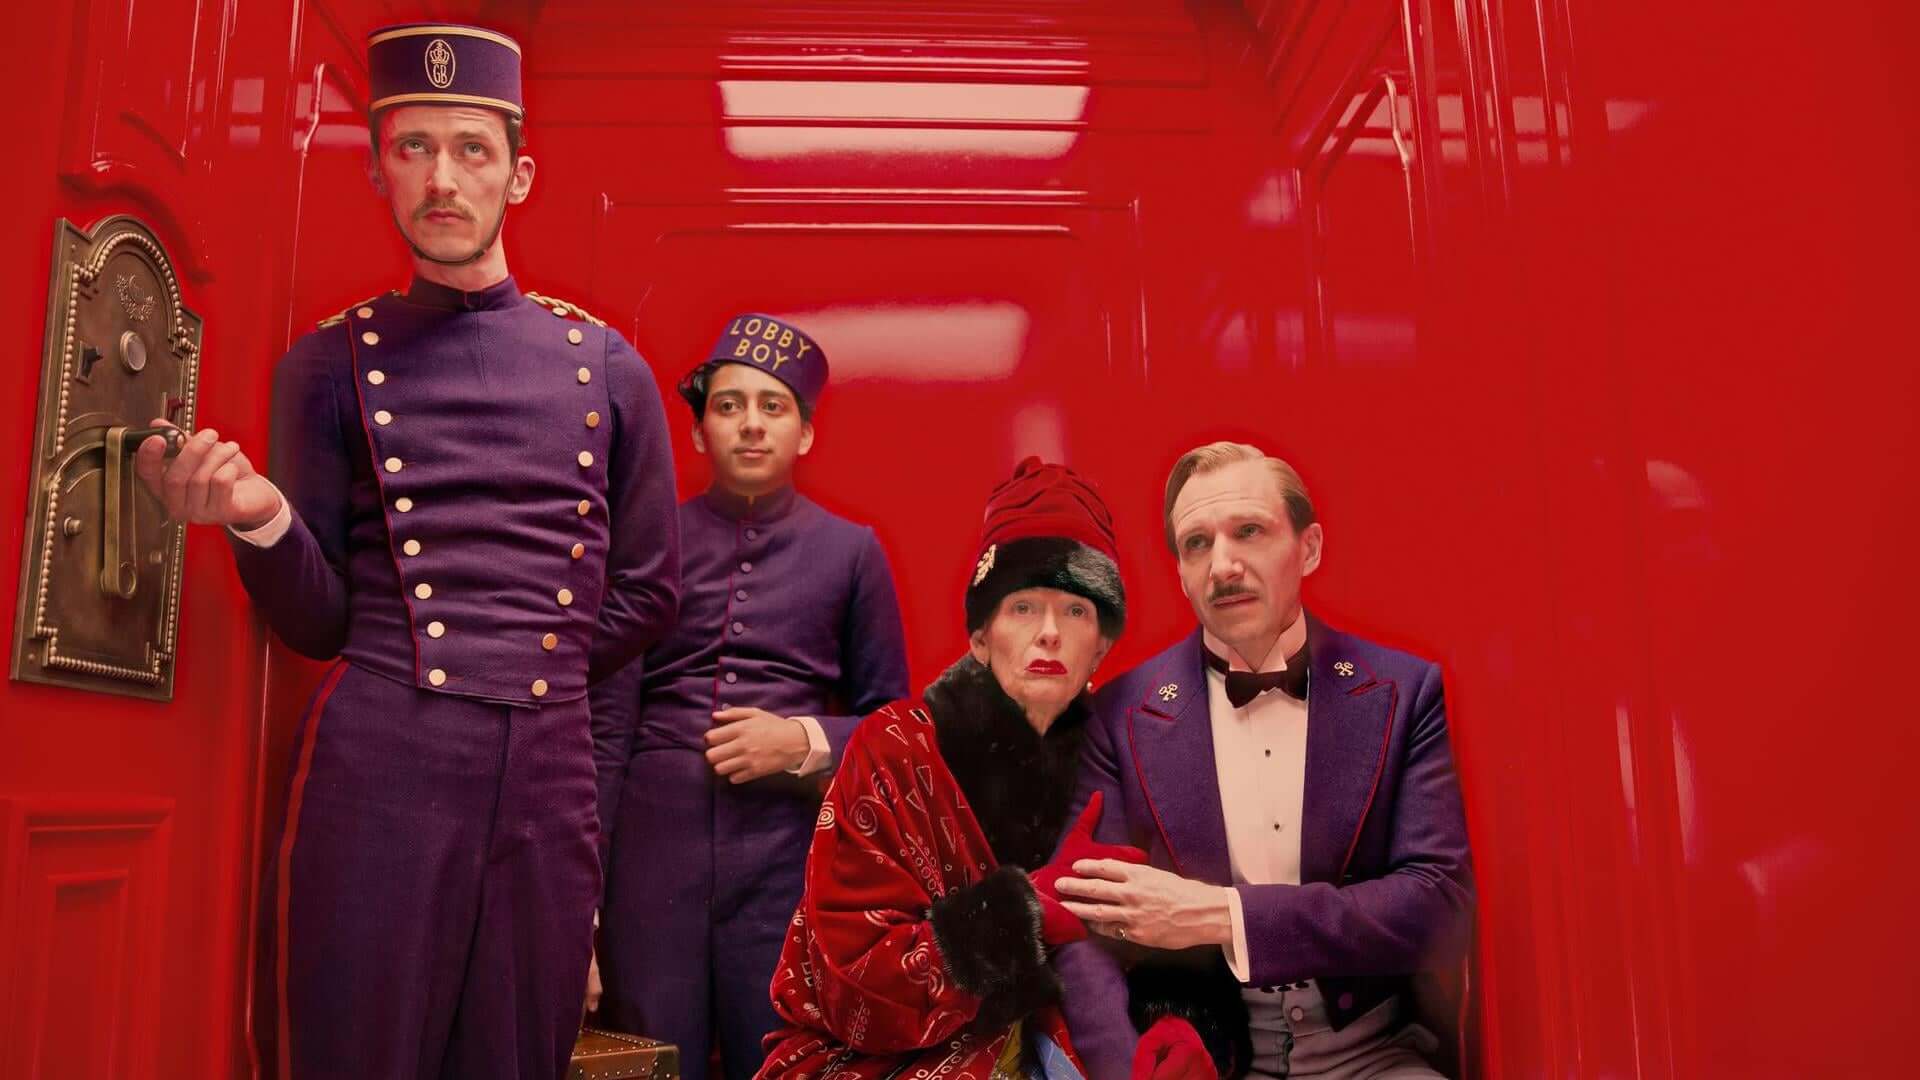 Still from The Grand Budapest Hotel (2014)